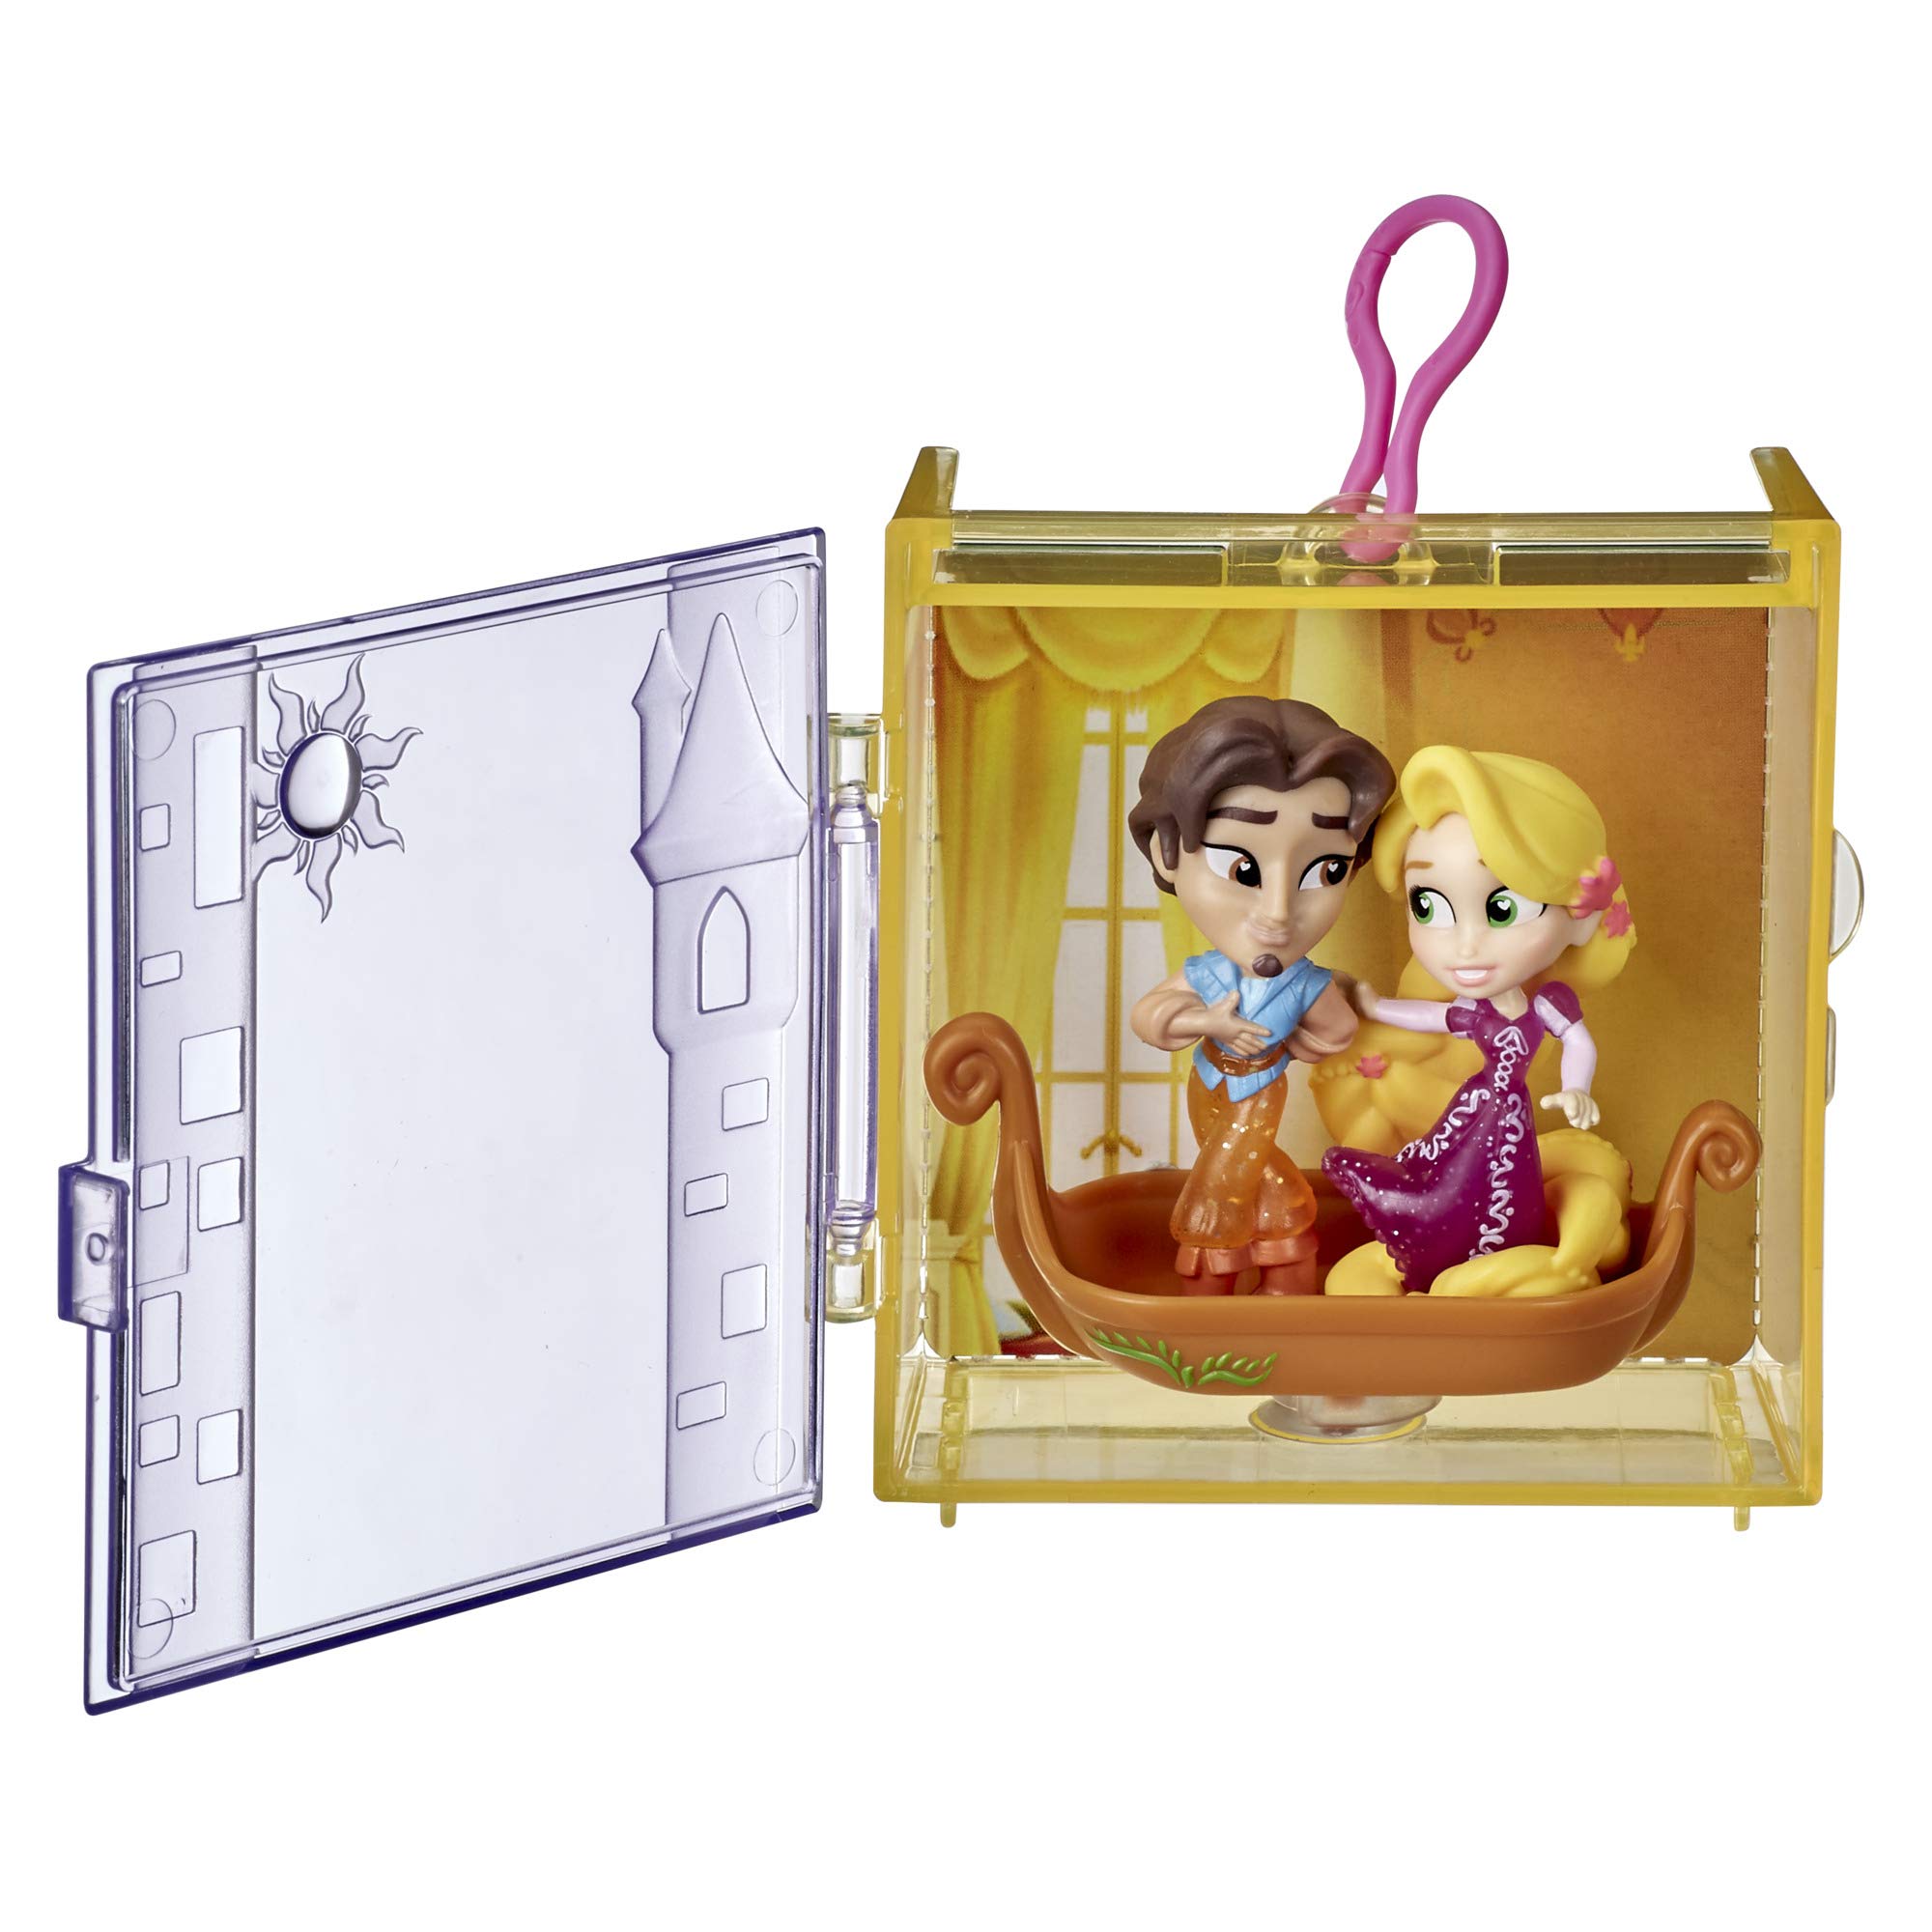 Disney Princess Perfect Pairs Rapunzel, Fun Tangled Unboxing Toy with 2 Dolls, Display Case and Boat Stand, for Kids 3 Years and Up